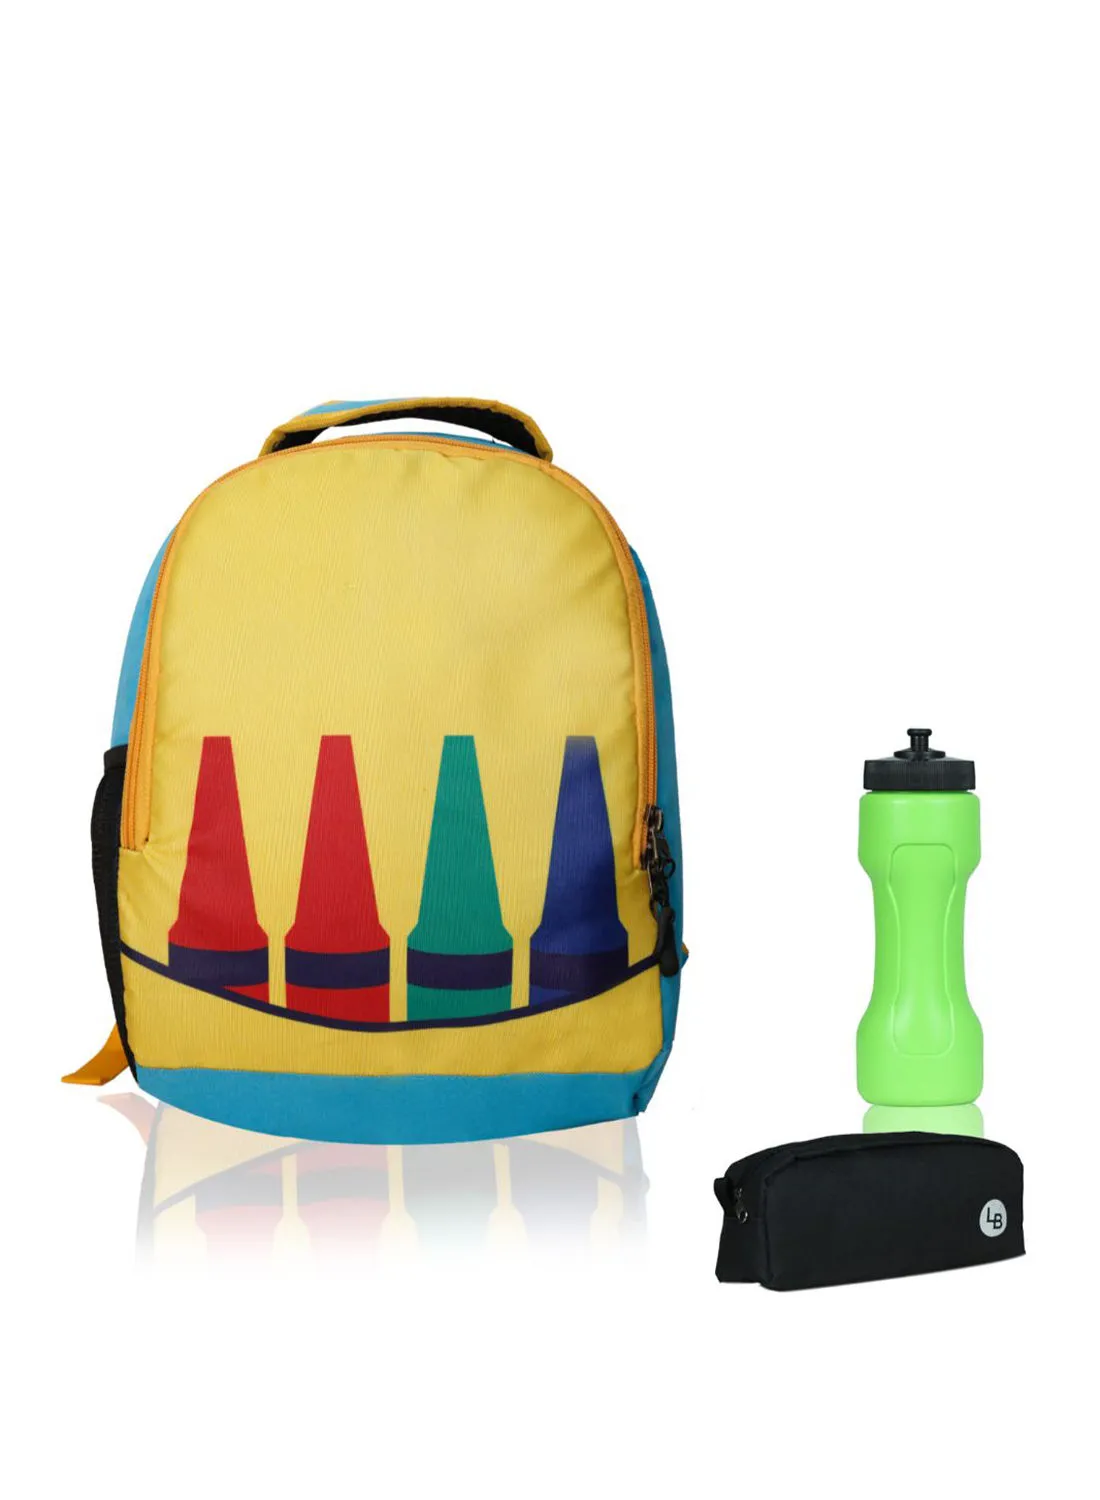 LIONBONE Kids Backpack With Sipper And Pouch Yellow/Black/Green